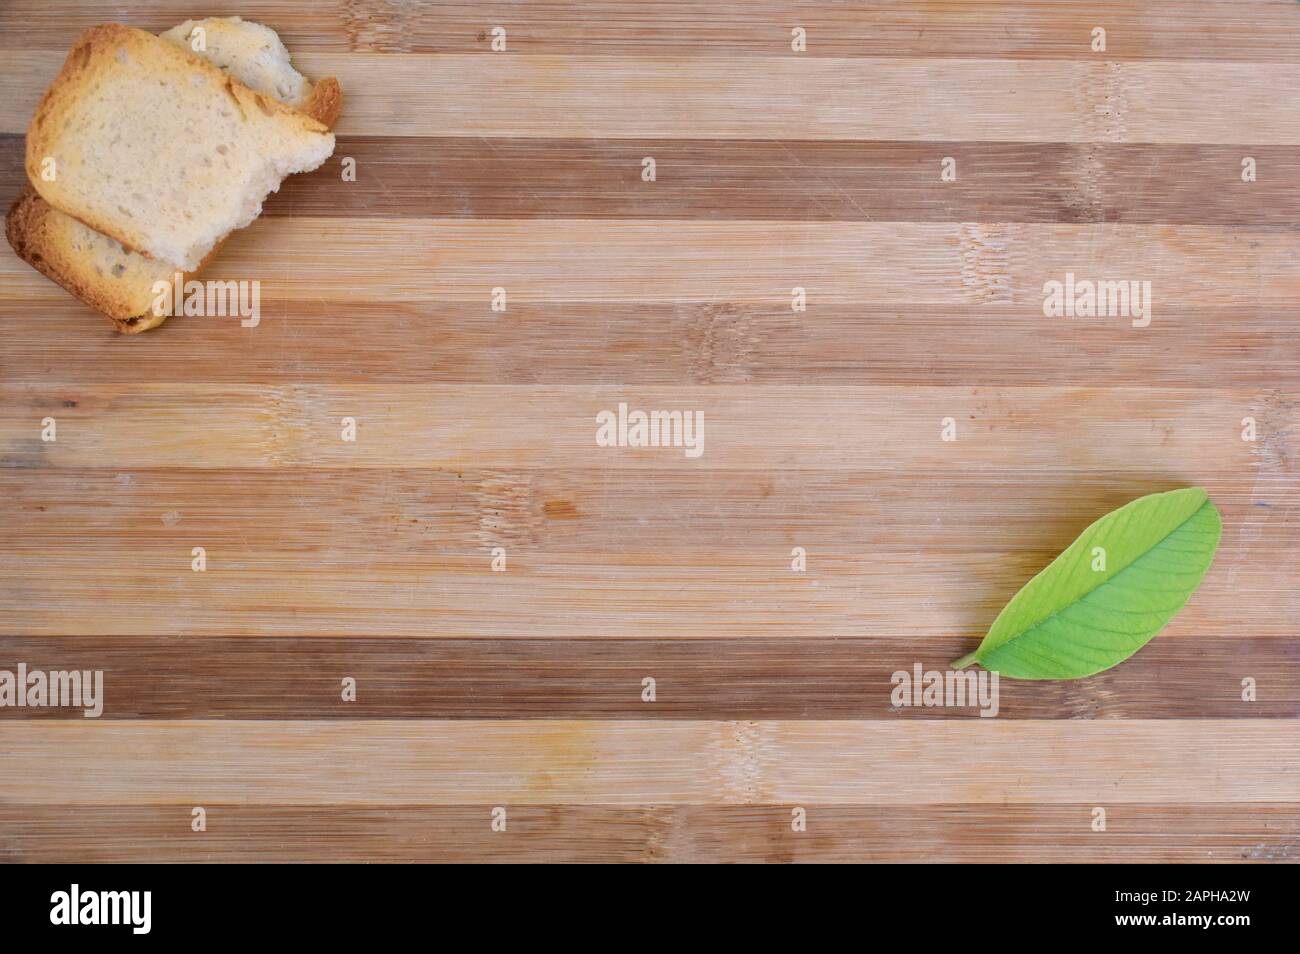 Beautiful picture of a chopping boards with fruits and leafs Stock Photo